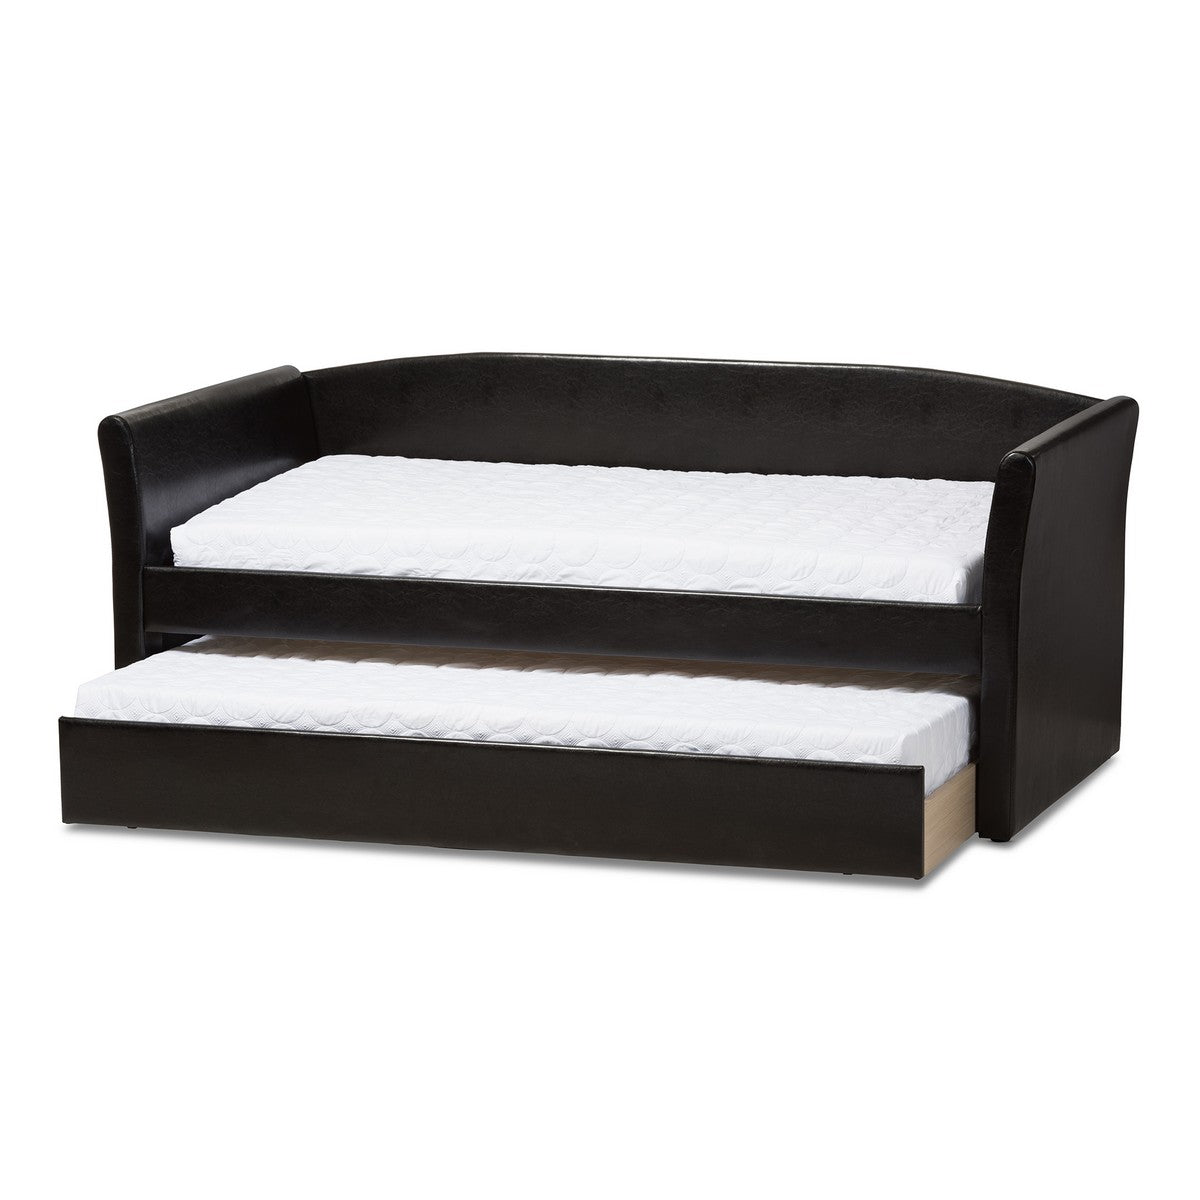 Baxton Studio Camino Modern and Contemporary Black Faux Leather Upholstered Daybed with Guest Trundle Bed